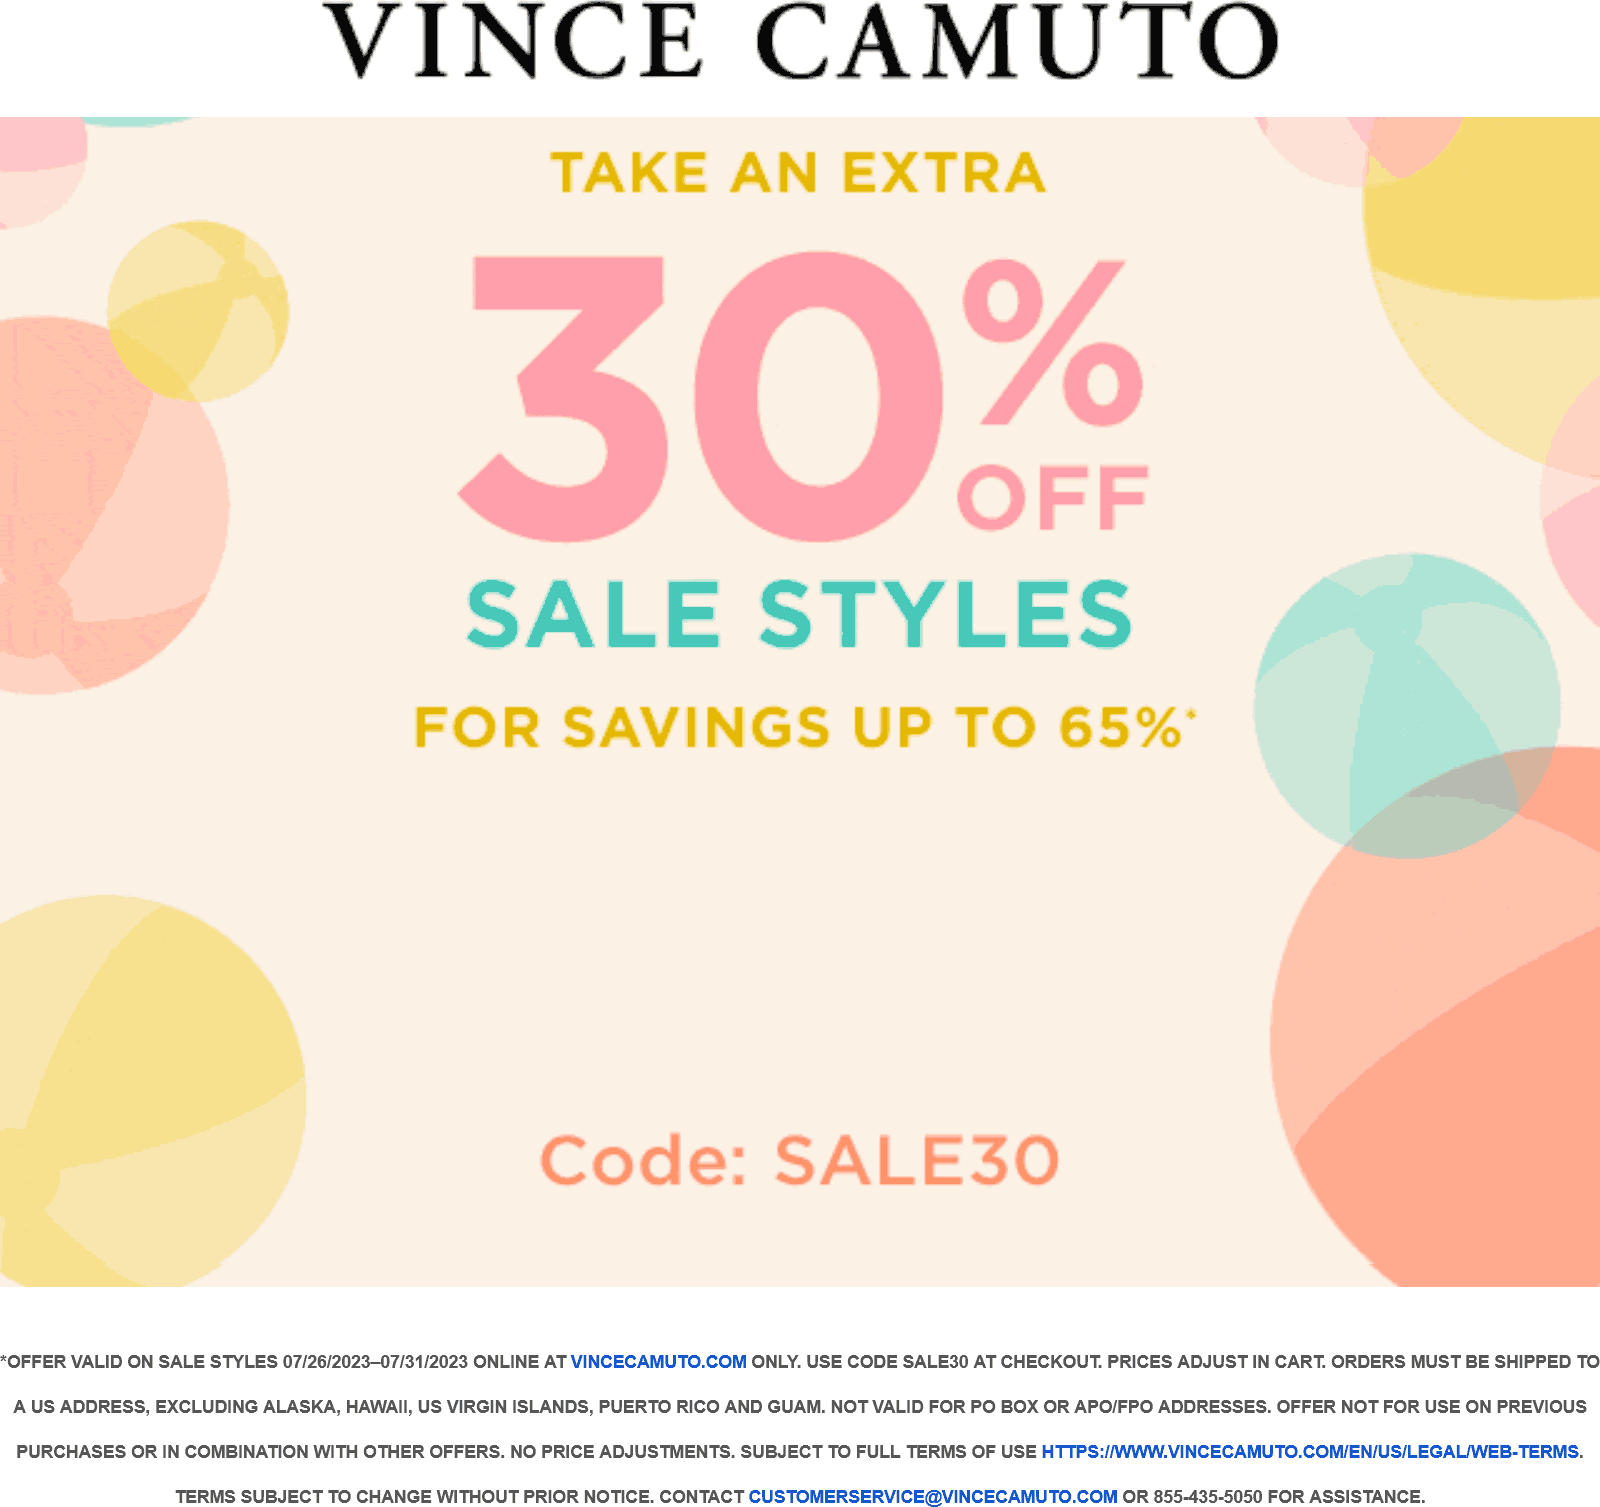 Vince Camuto stores Coupon  Extra 30% off sale items online at Vince Camuto via promo code SALE30 #vincecamuto 